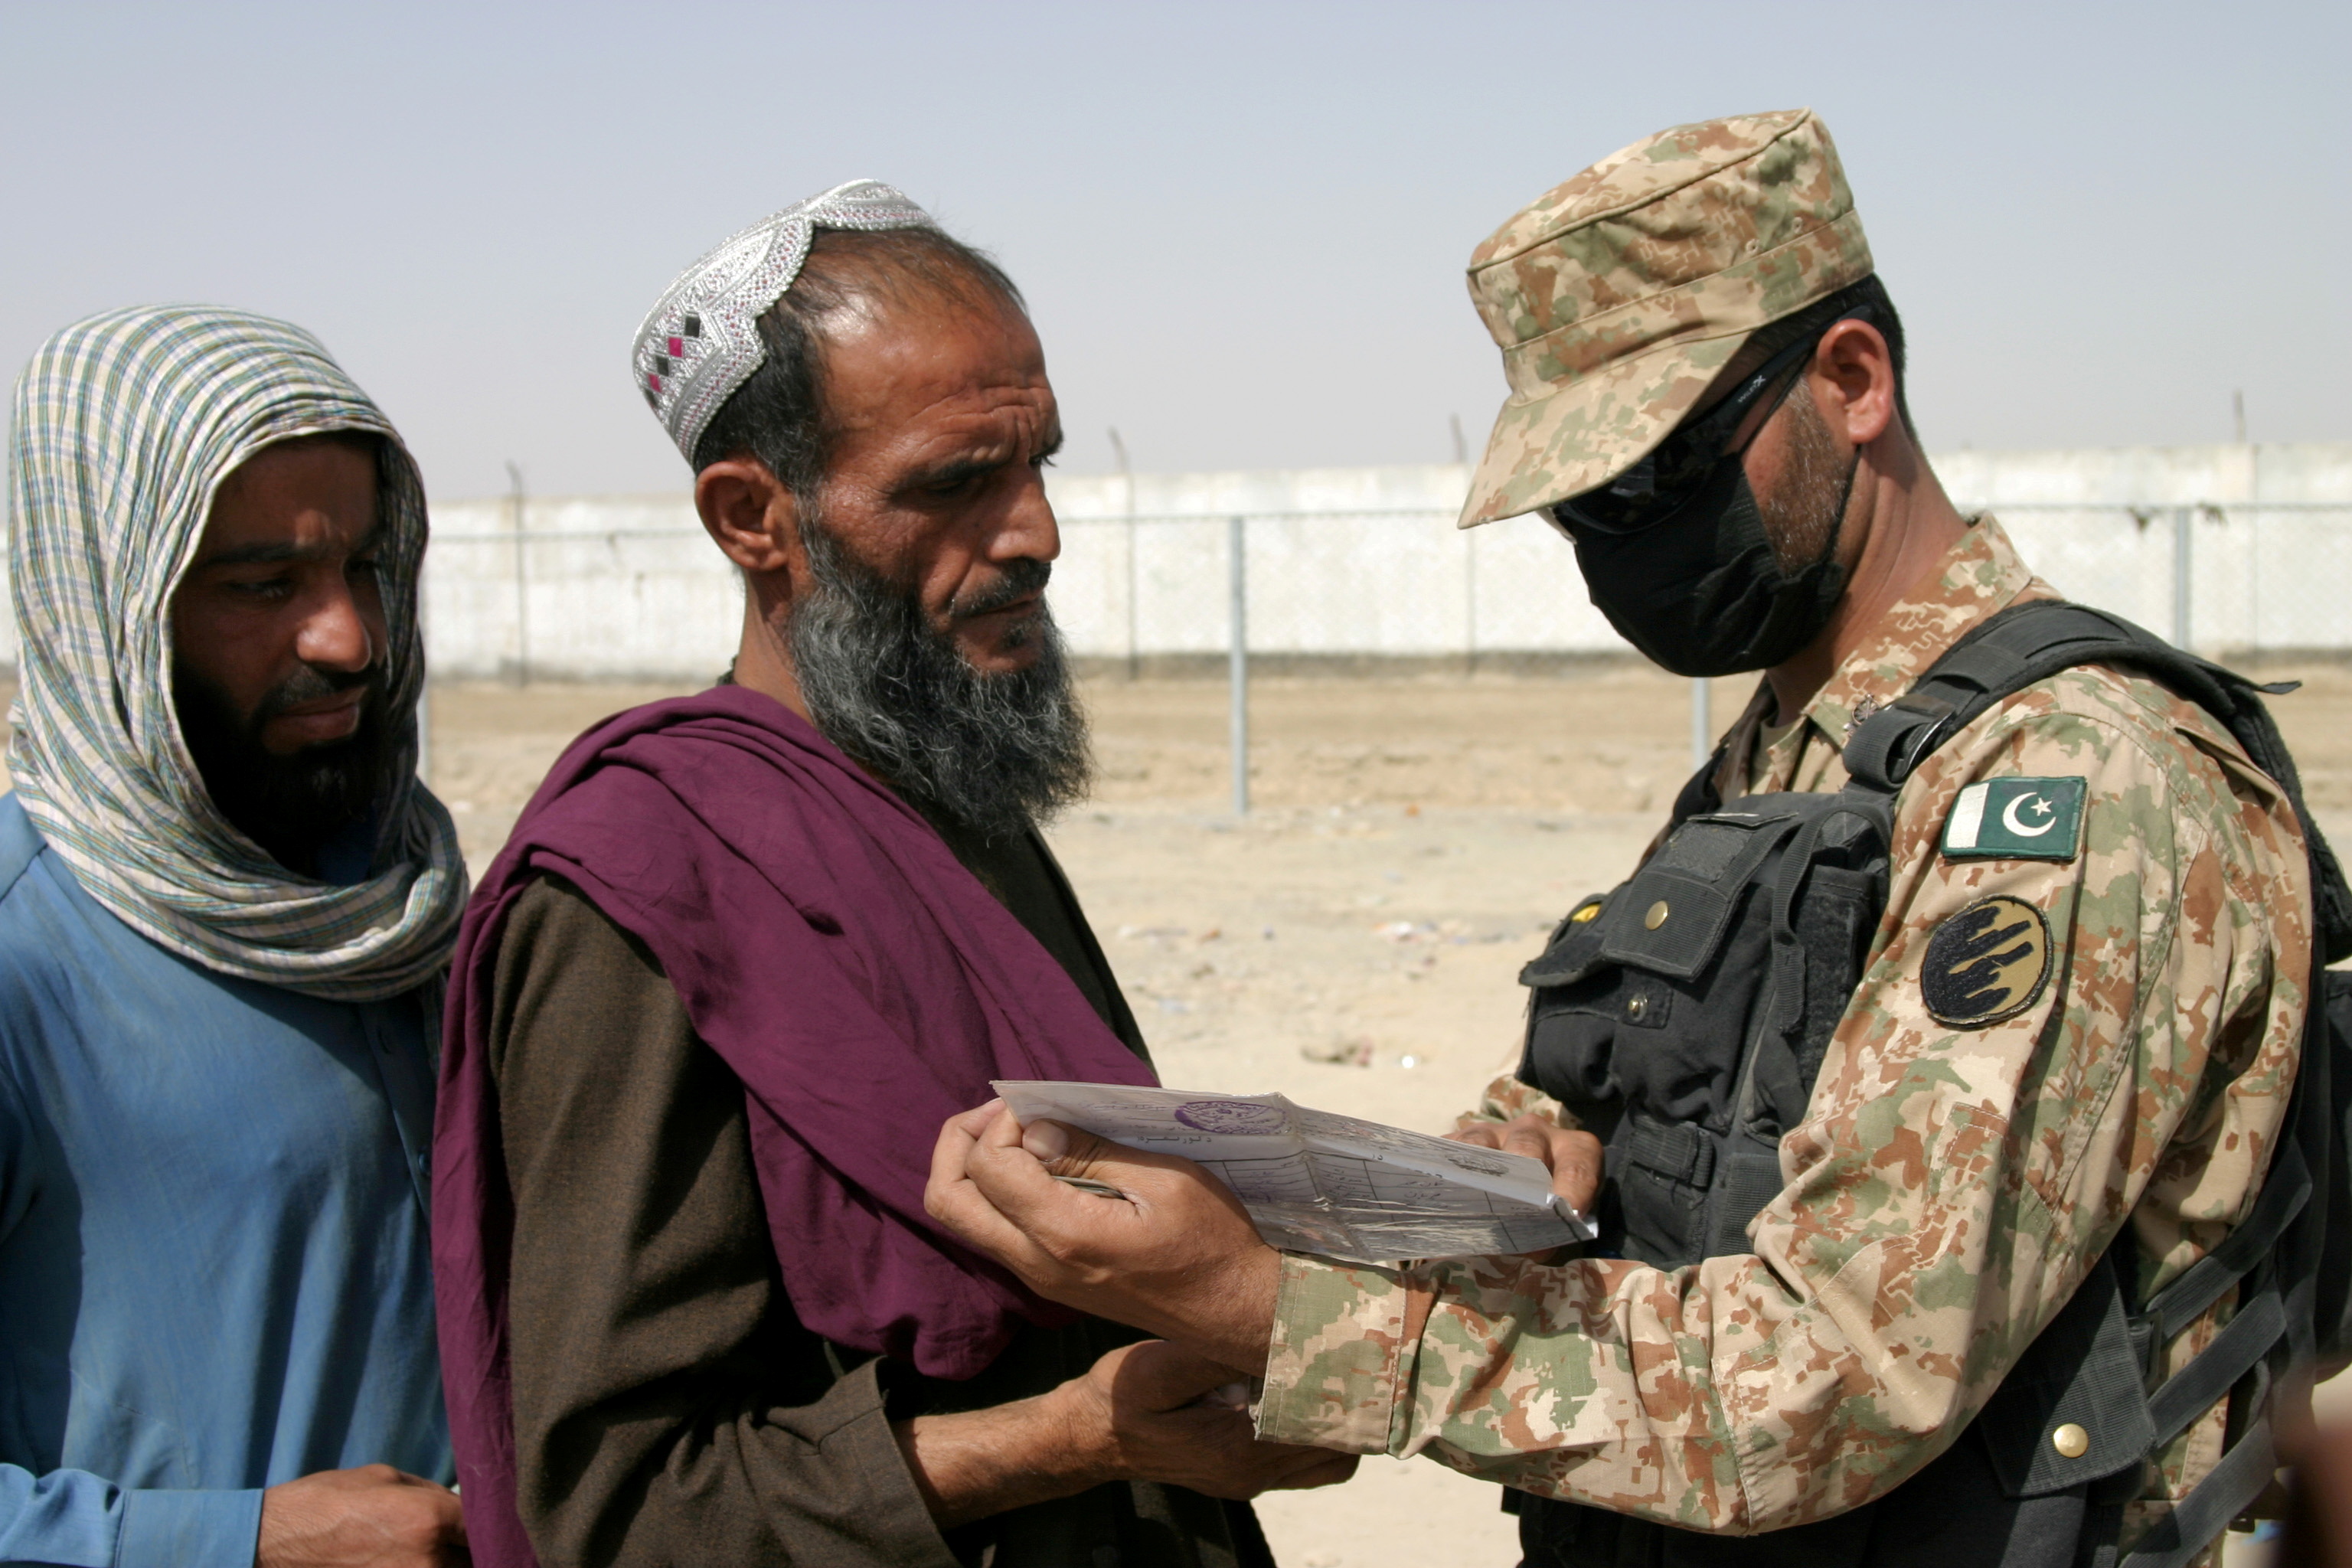 A Pakistani worker  checks documents of radical   arriving from Afghanistan astatine  the Friendship Gate crossing constituent   successful  the Pakistan-Afghanistan borderline  municipality  of Chaman, Pakistan August 27, 2021. REUTERS/Saeed Ali Achakzai/File Photo